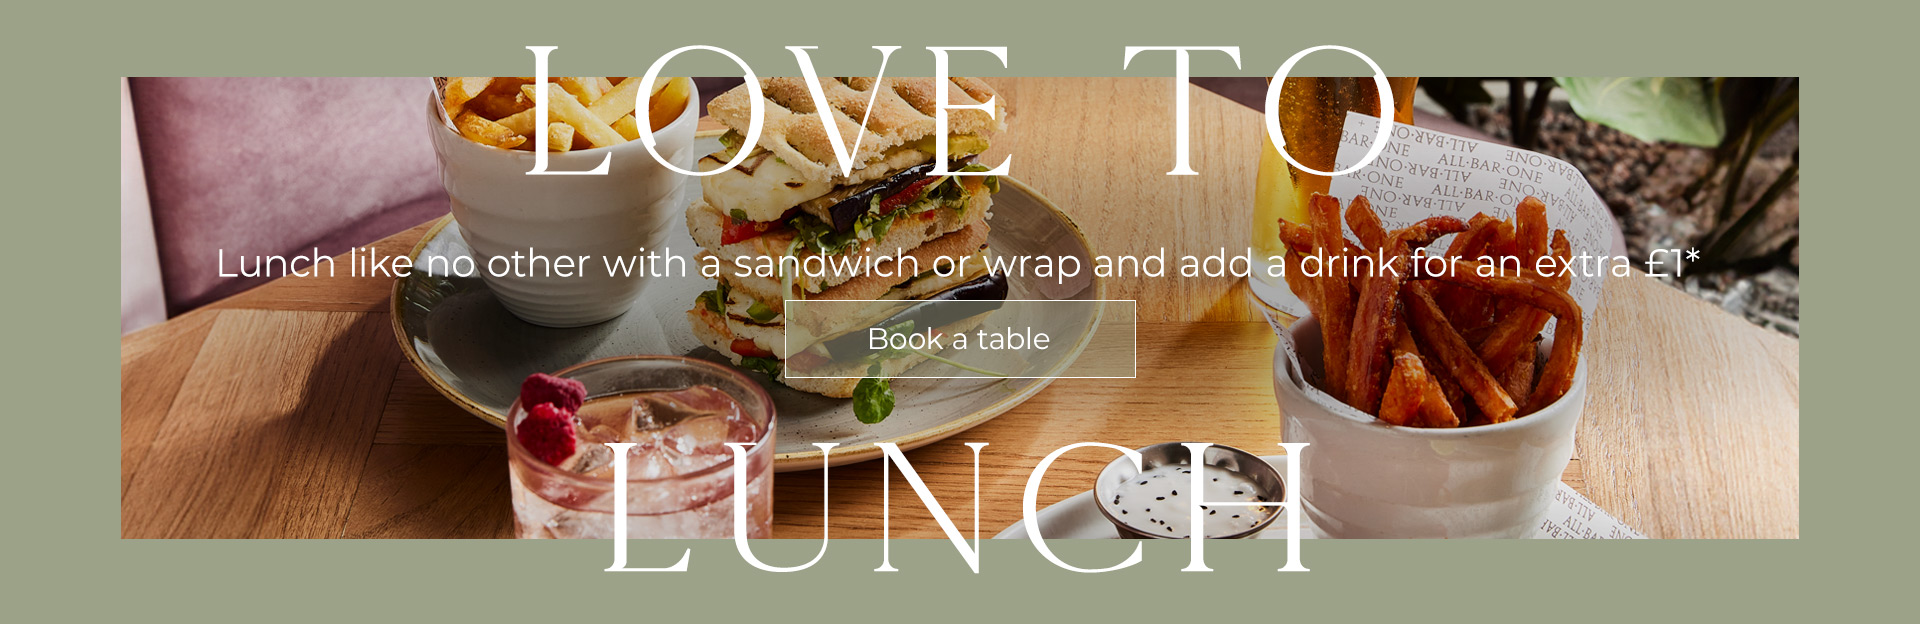 Lunch Offer at All Bar One Picton Place